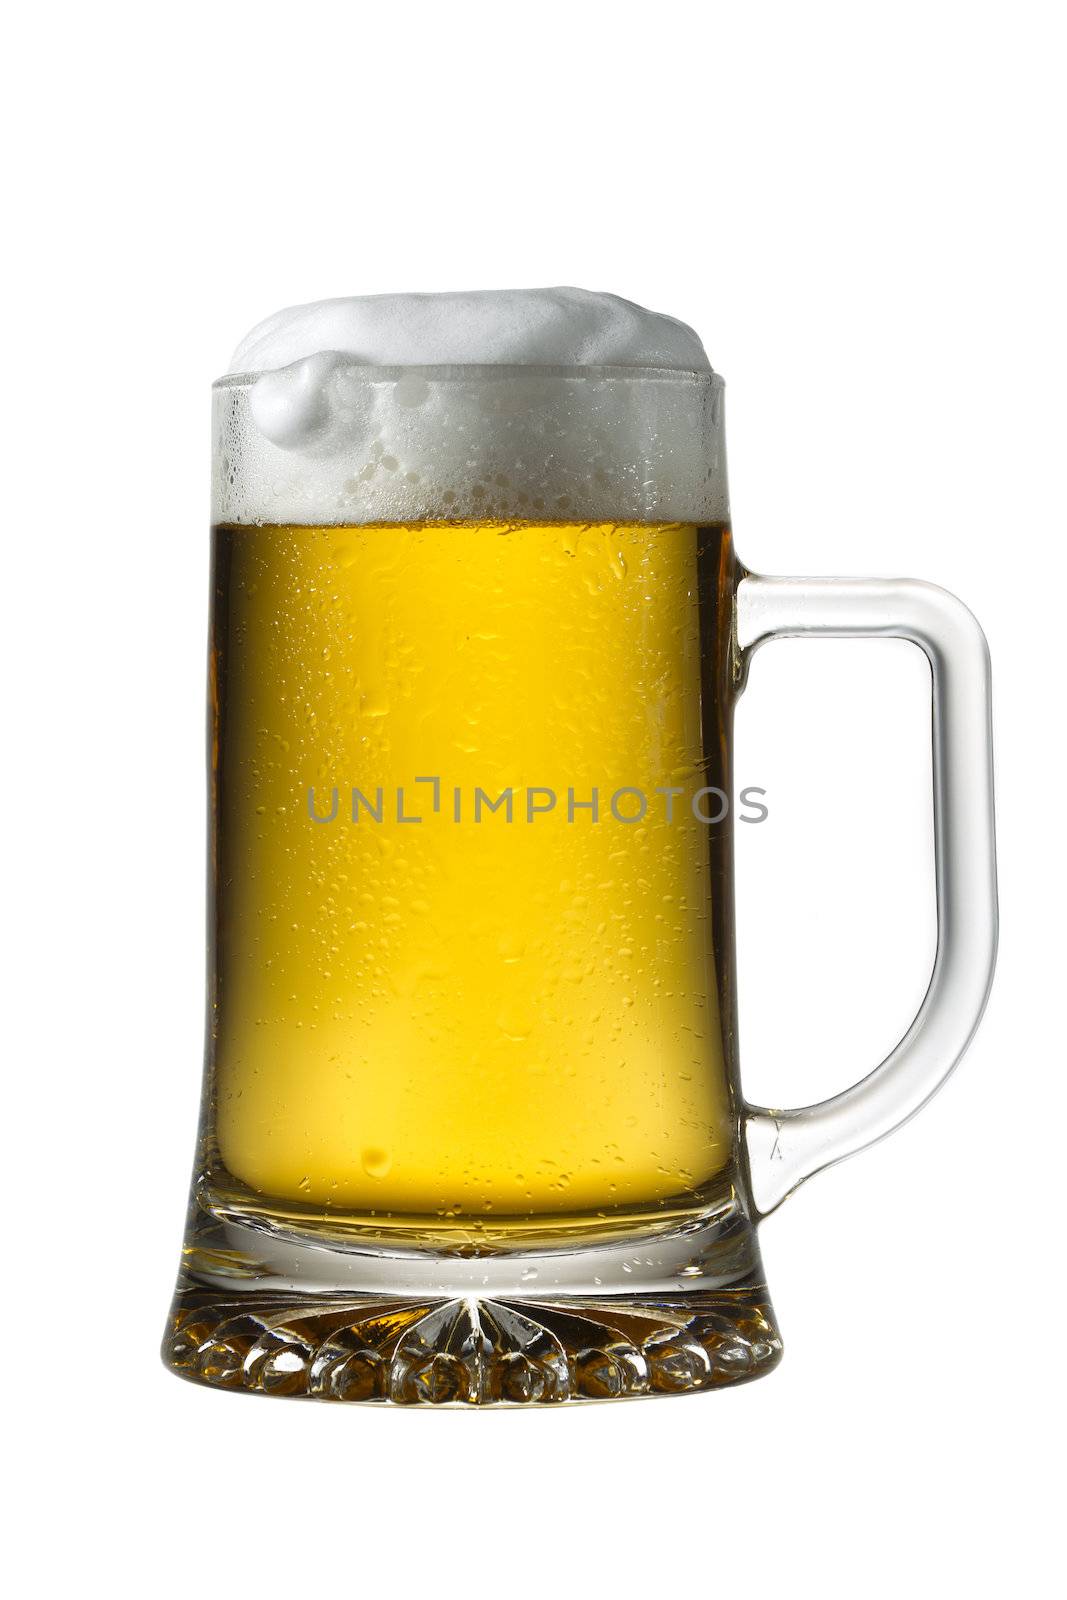 A close-up portrait of cold beer on a white background